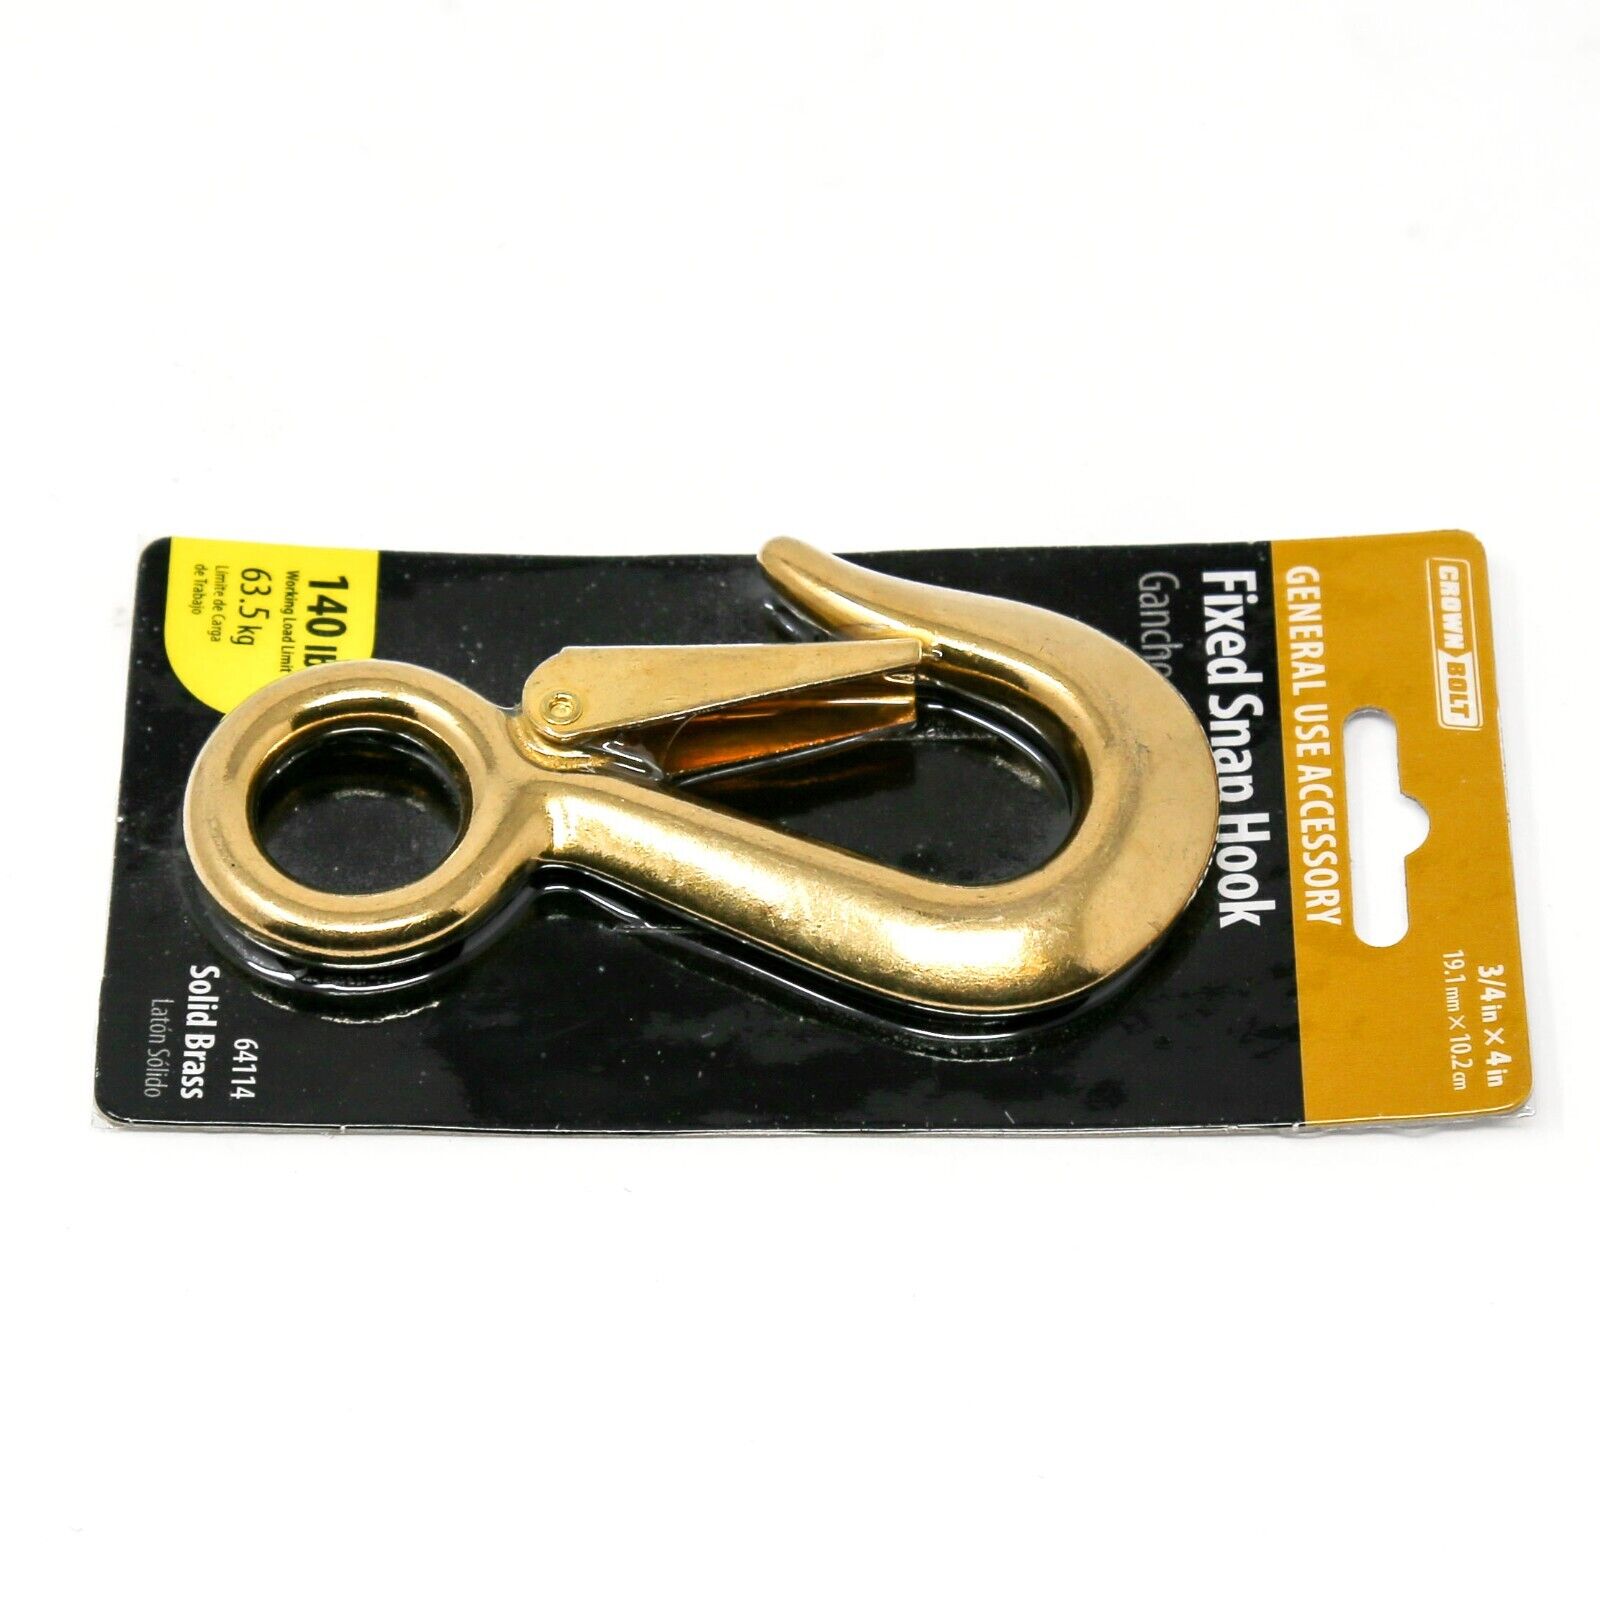 2 pcs Crown Bolt 3/4 x 4 in. Boat Snap Hook with Round Fixed Eye Solid CROWN BOLT 64114 - фотография #3